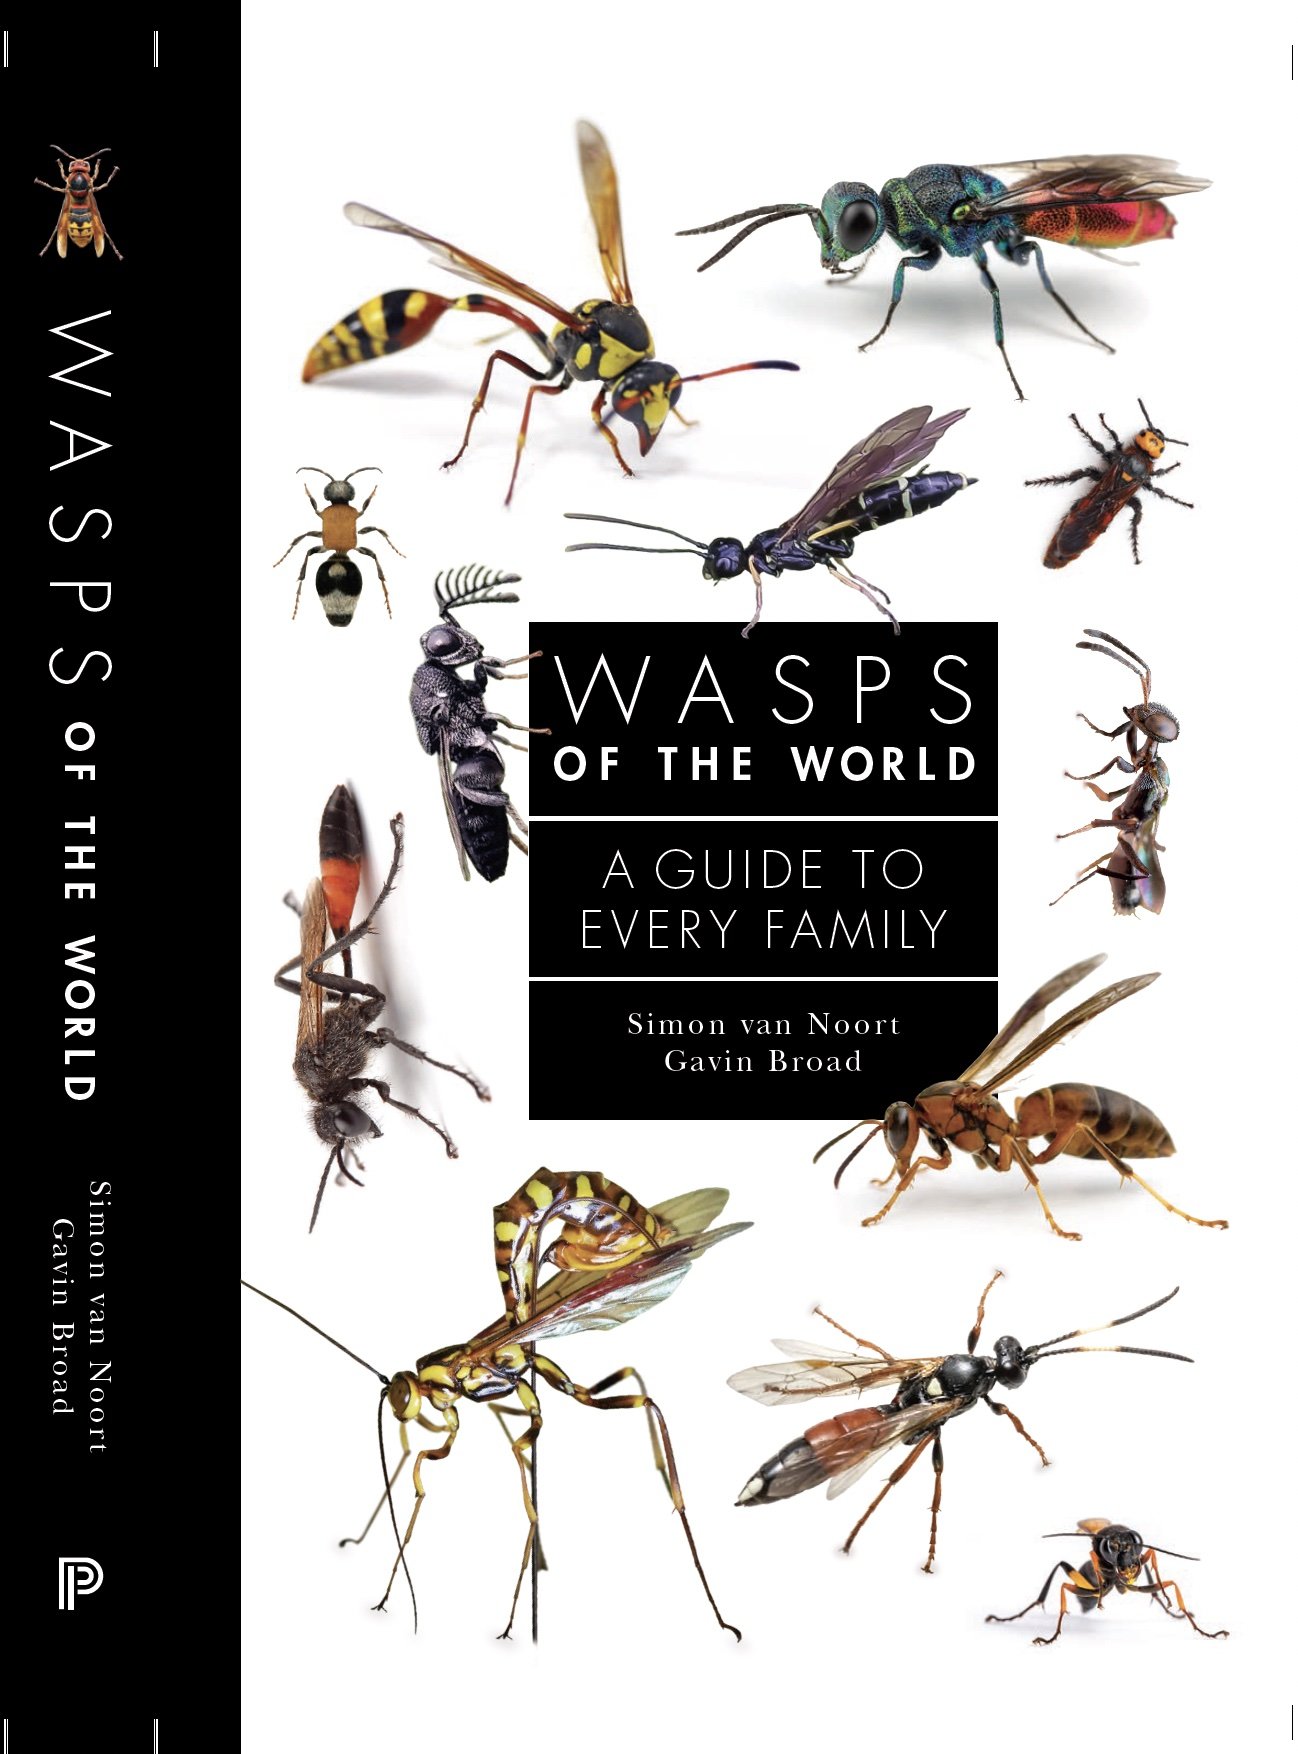 8_Wasps of the World Cover.jpg